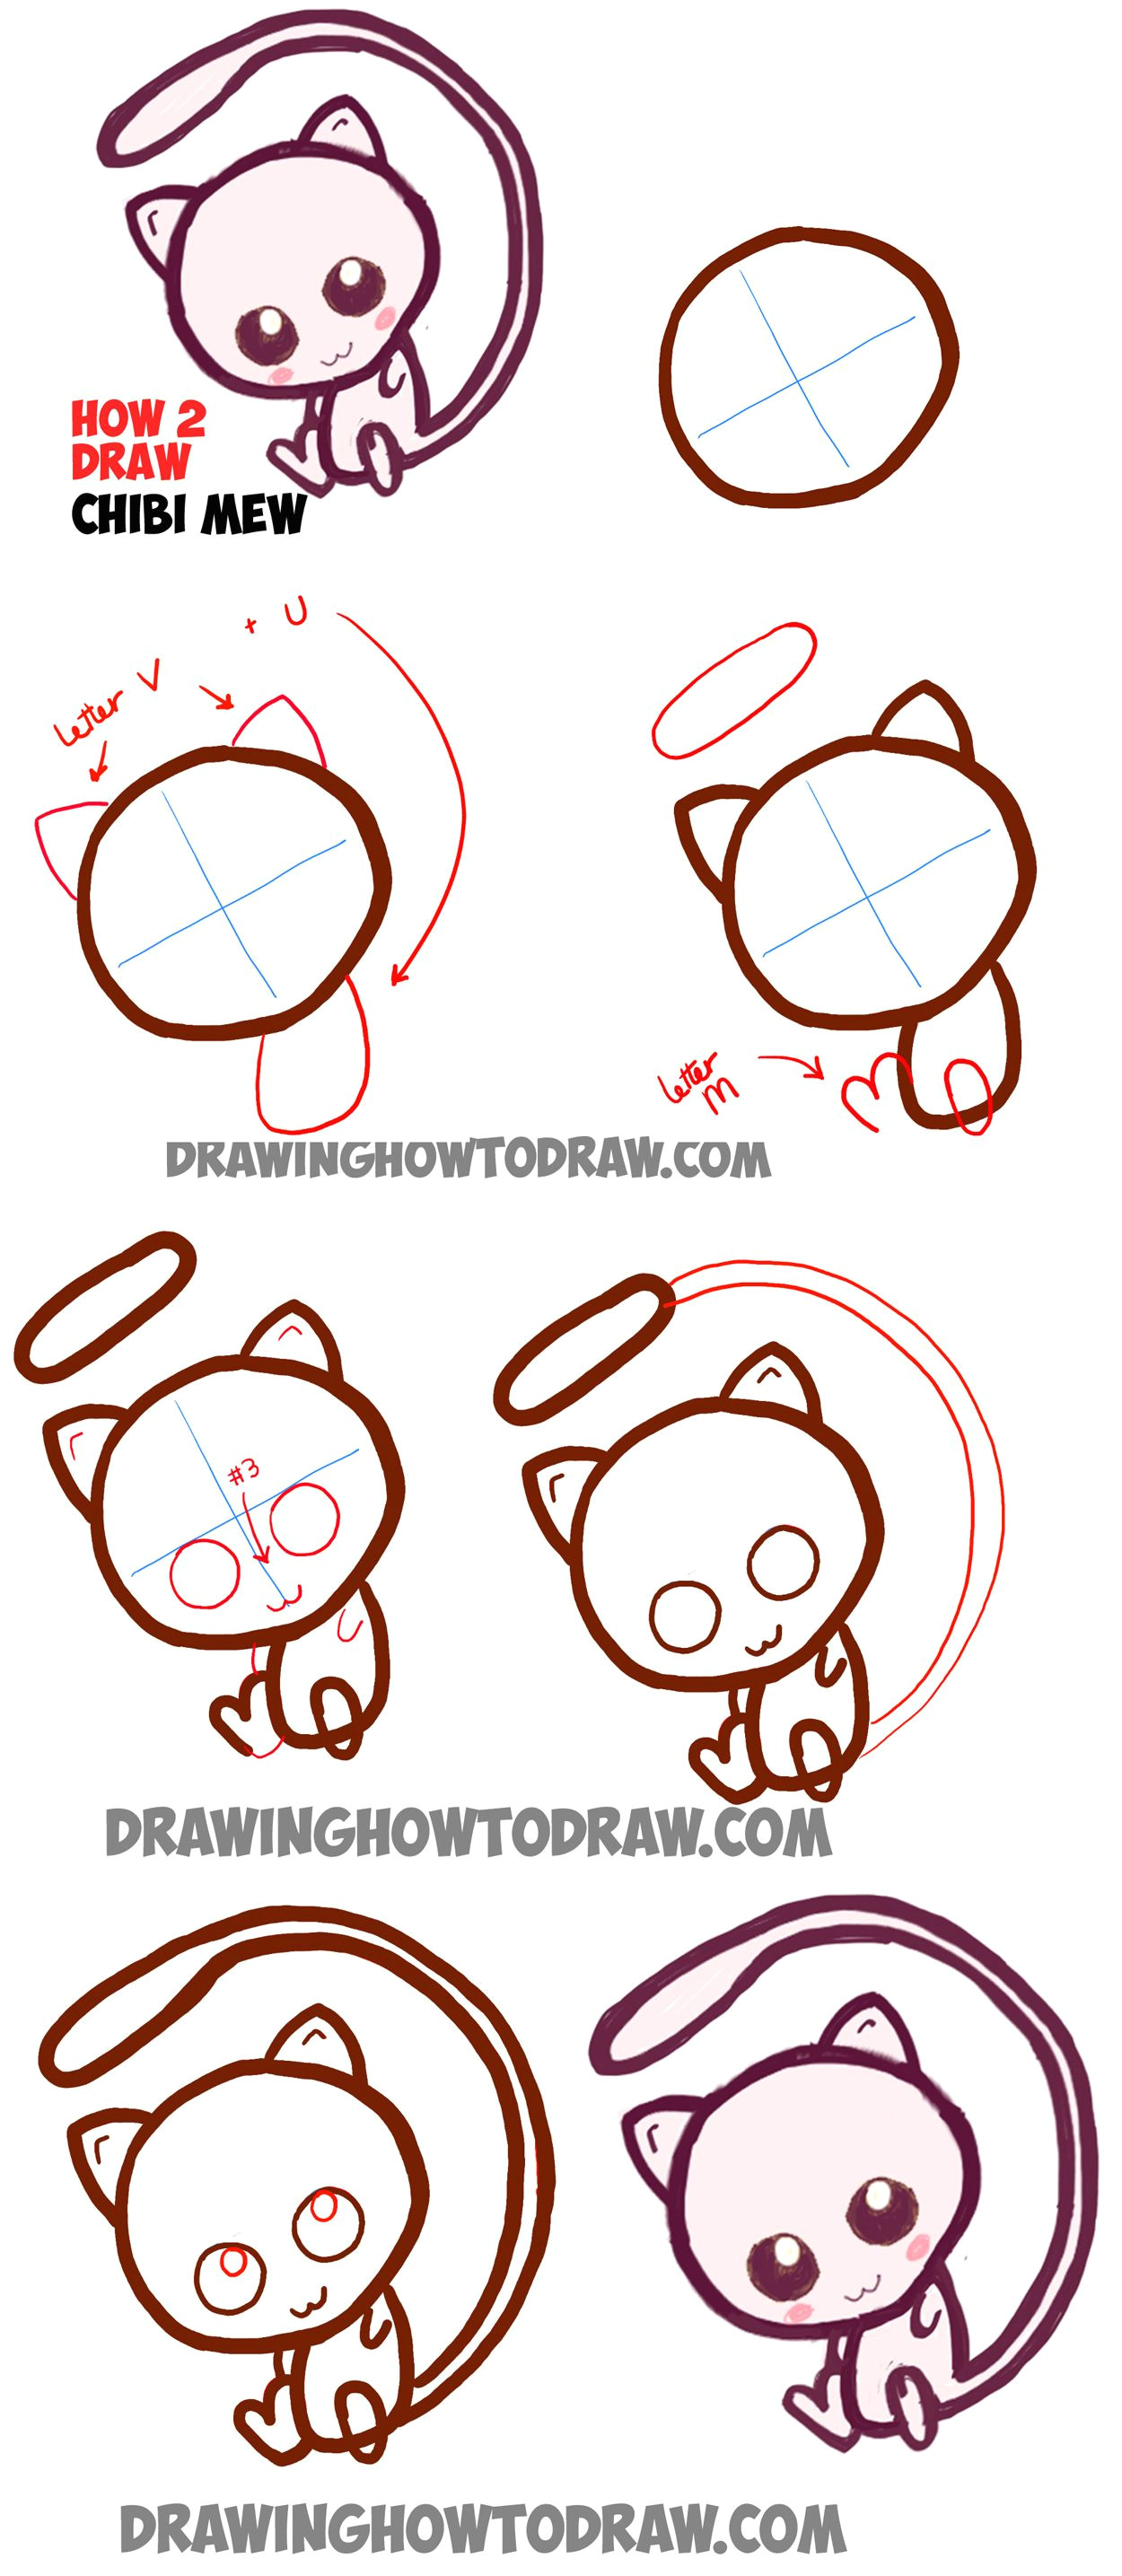 Fun 2 Draw Easy Drawings How to Draw Cute Baby Chibi Mew From Pokemon Easy Step by Step